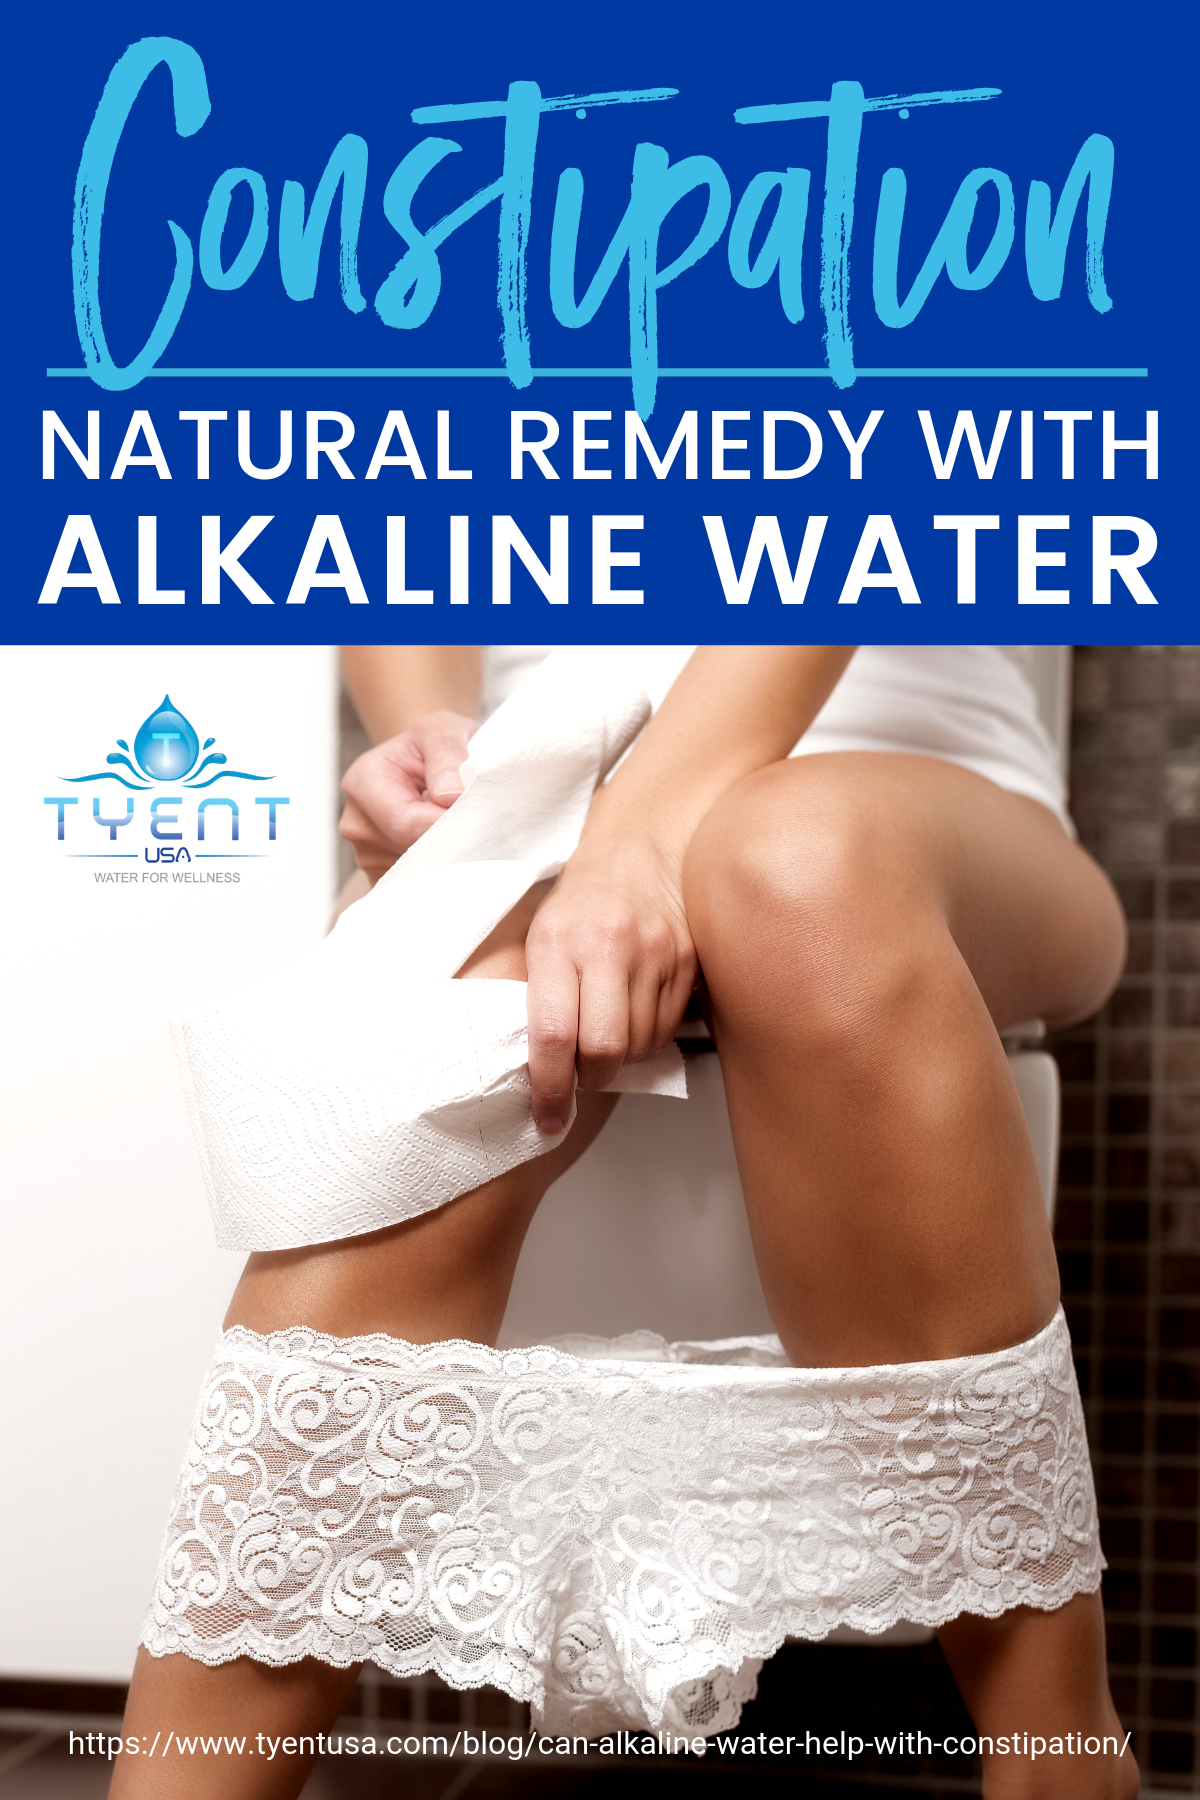 Constipation Natural Remedy With Alkaline Water – HOW IT WORKS [INFOGRAPHIC] https://www.tyentusa.com/blog/can-alkaline-water-help-with-constipation/